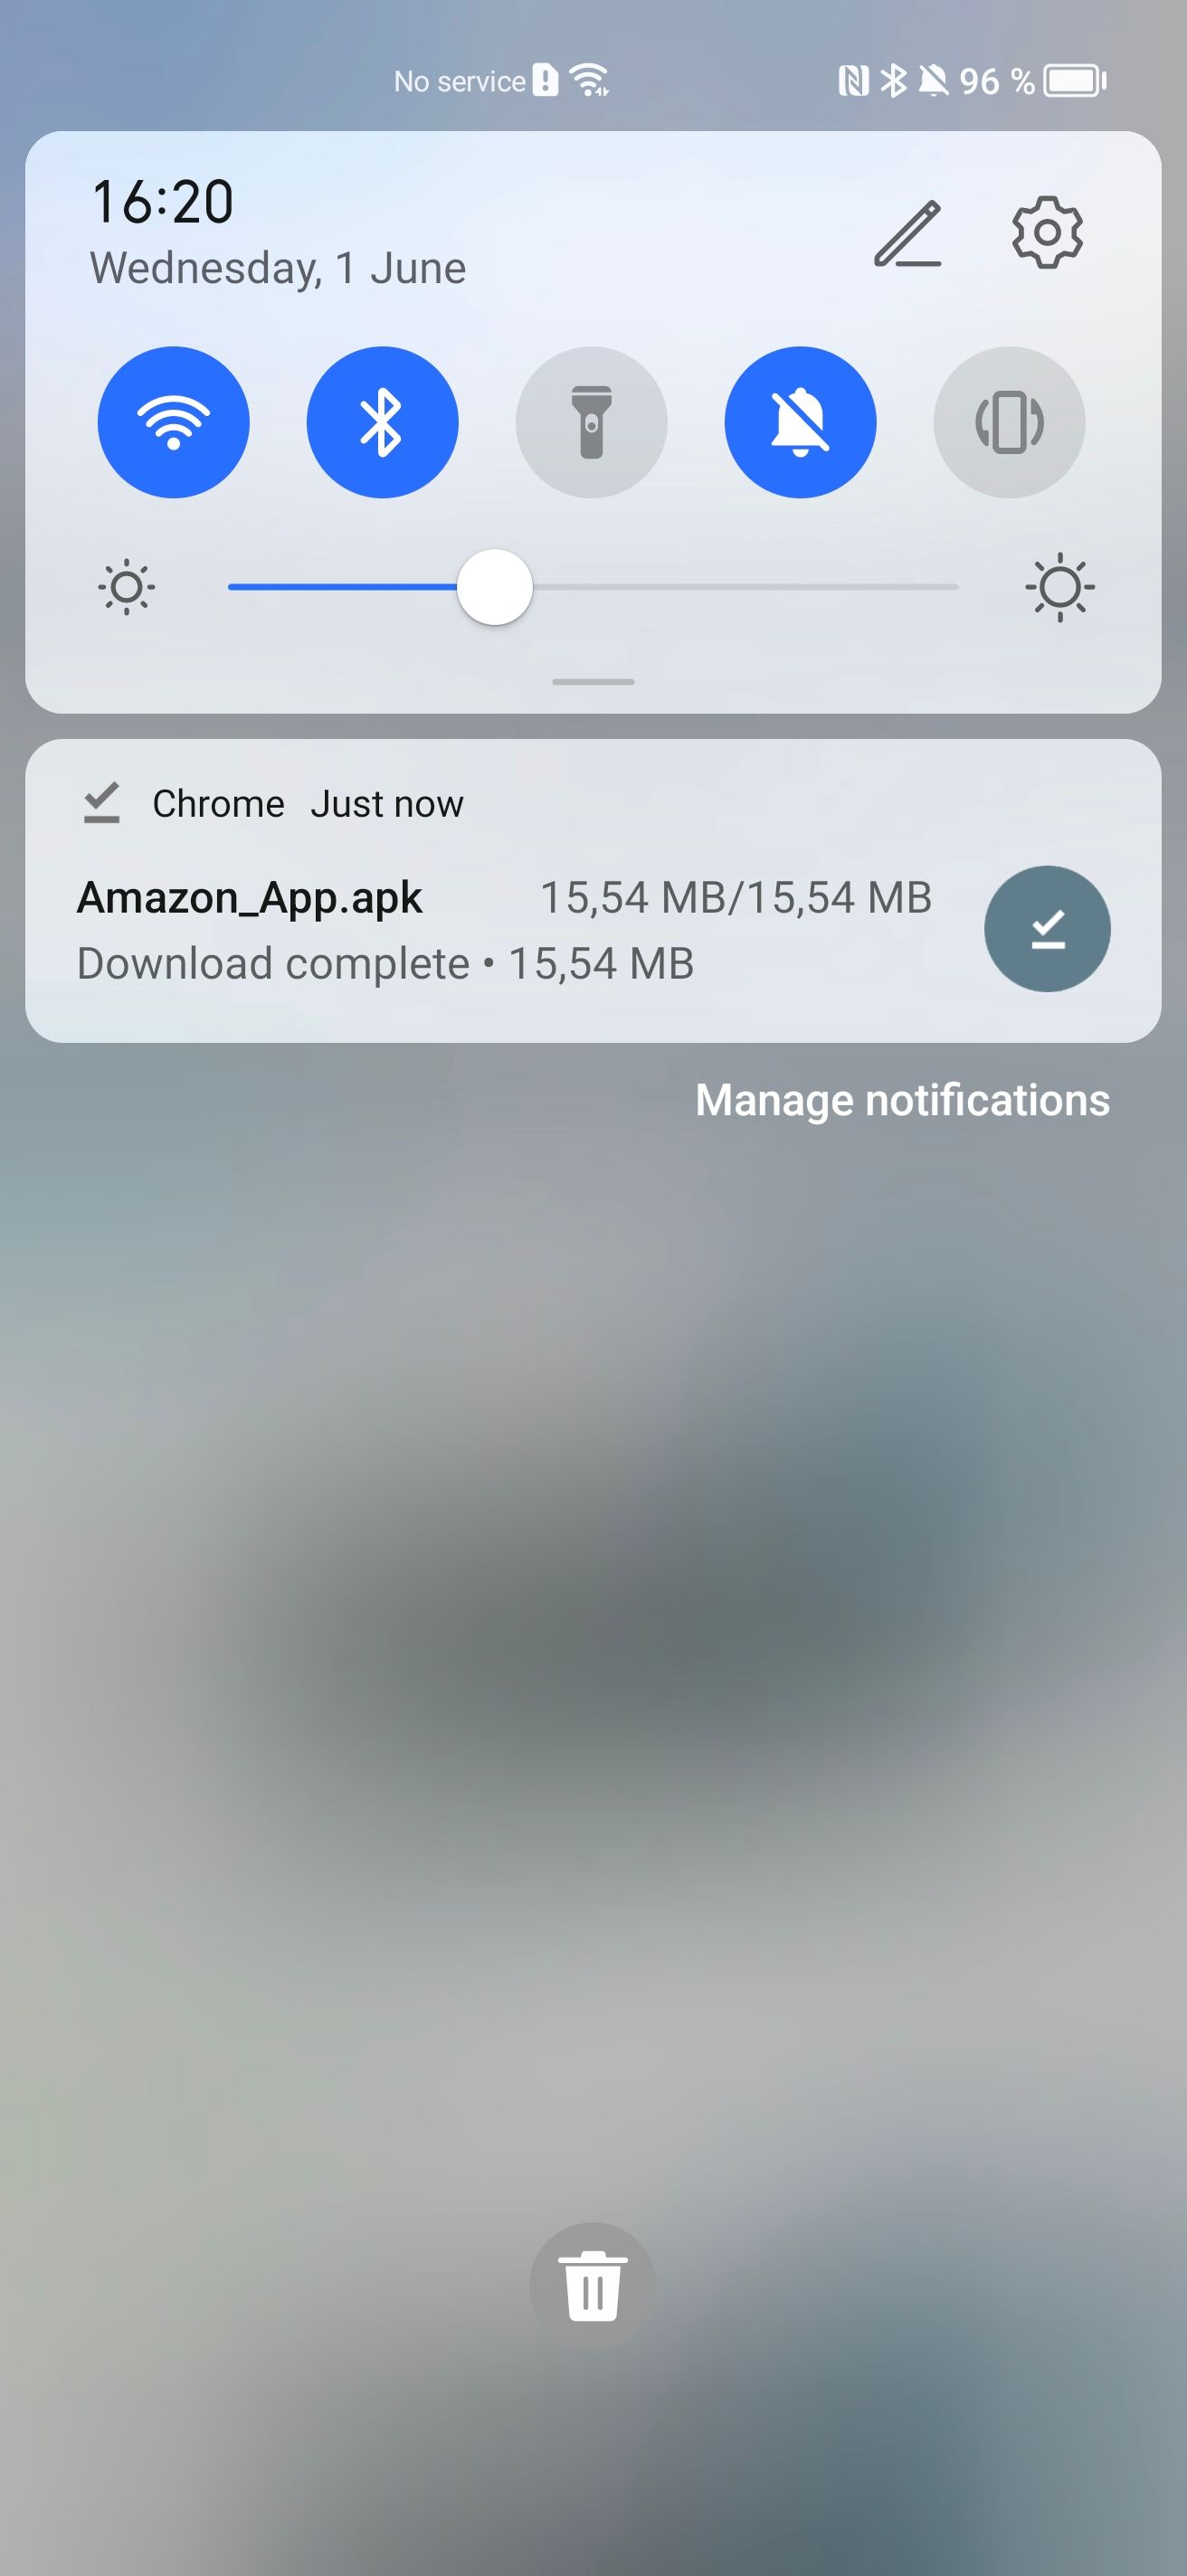 The Android notifications showing a completed download.